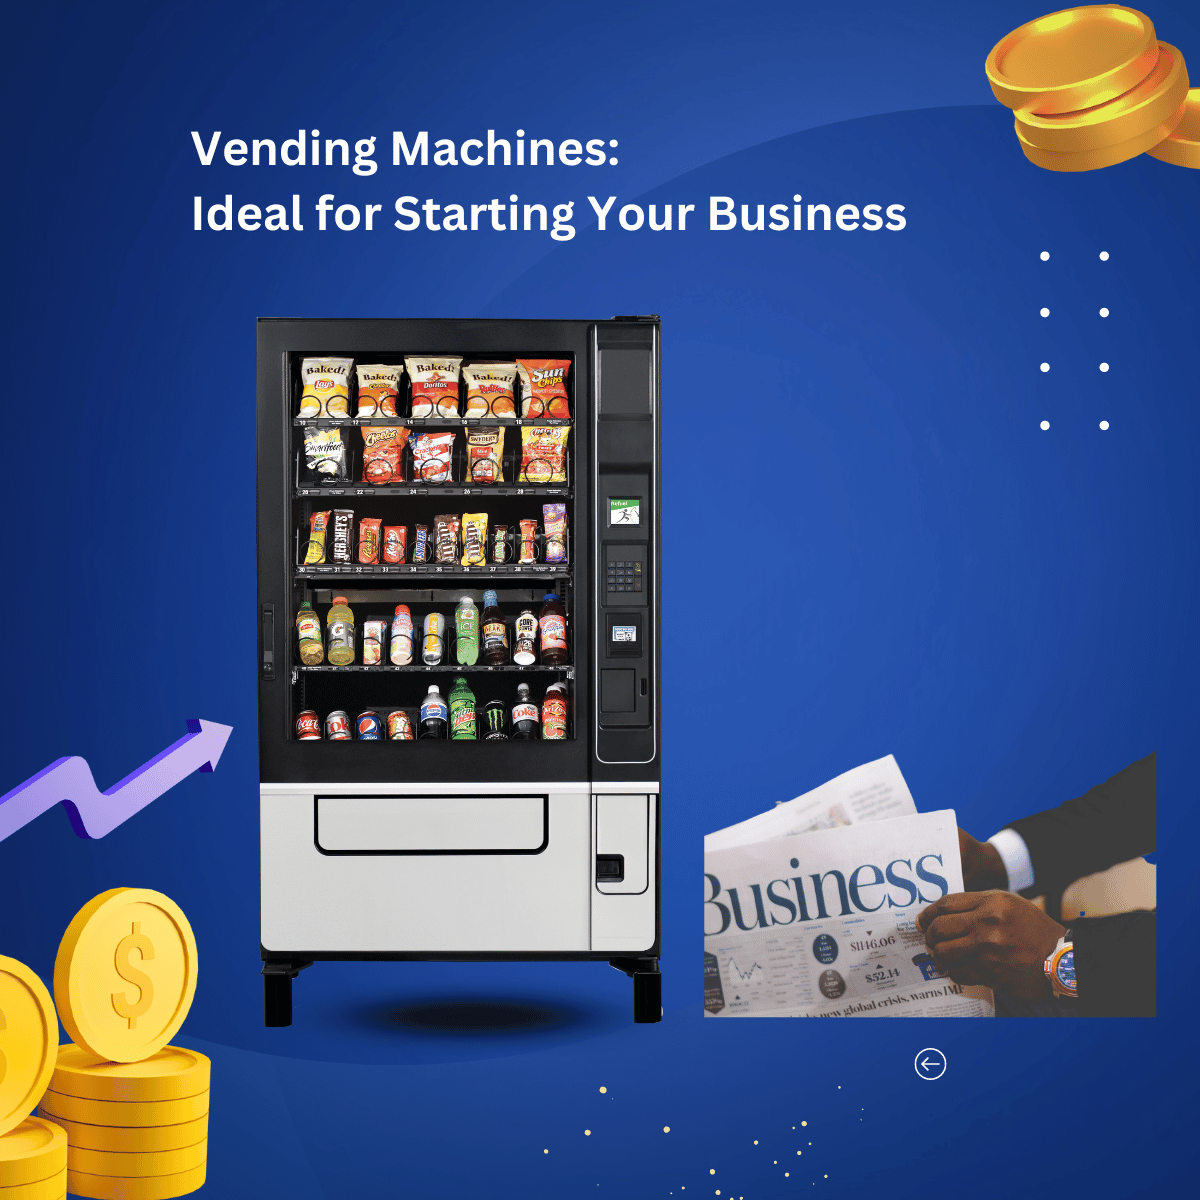 VENDING MACHINES ARE A GREAT WAY TO START YOUR OWN BUSINESS